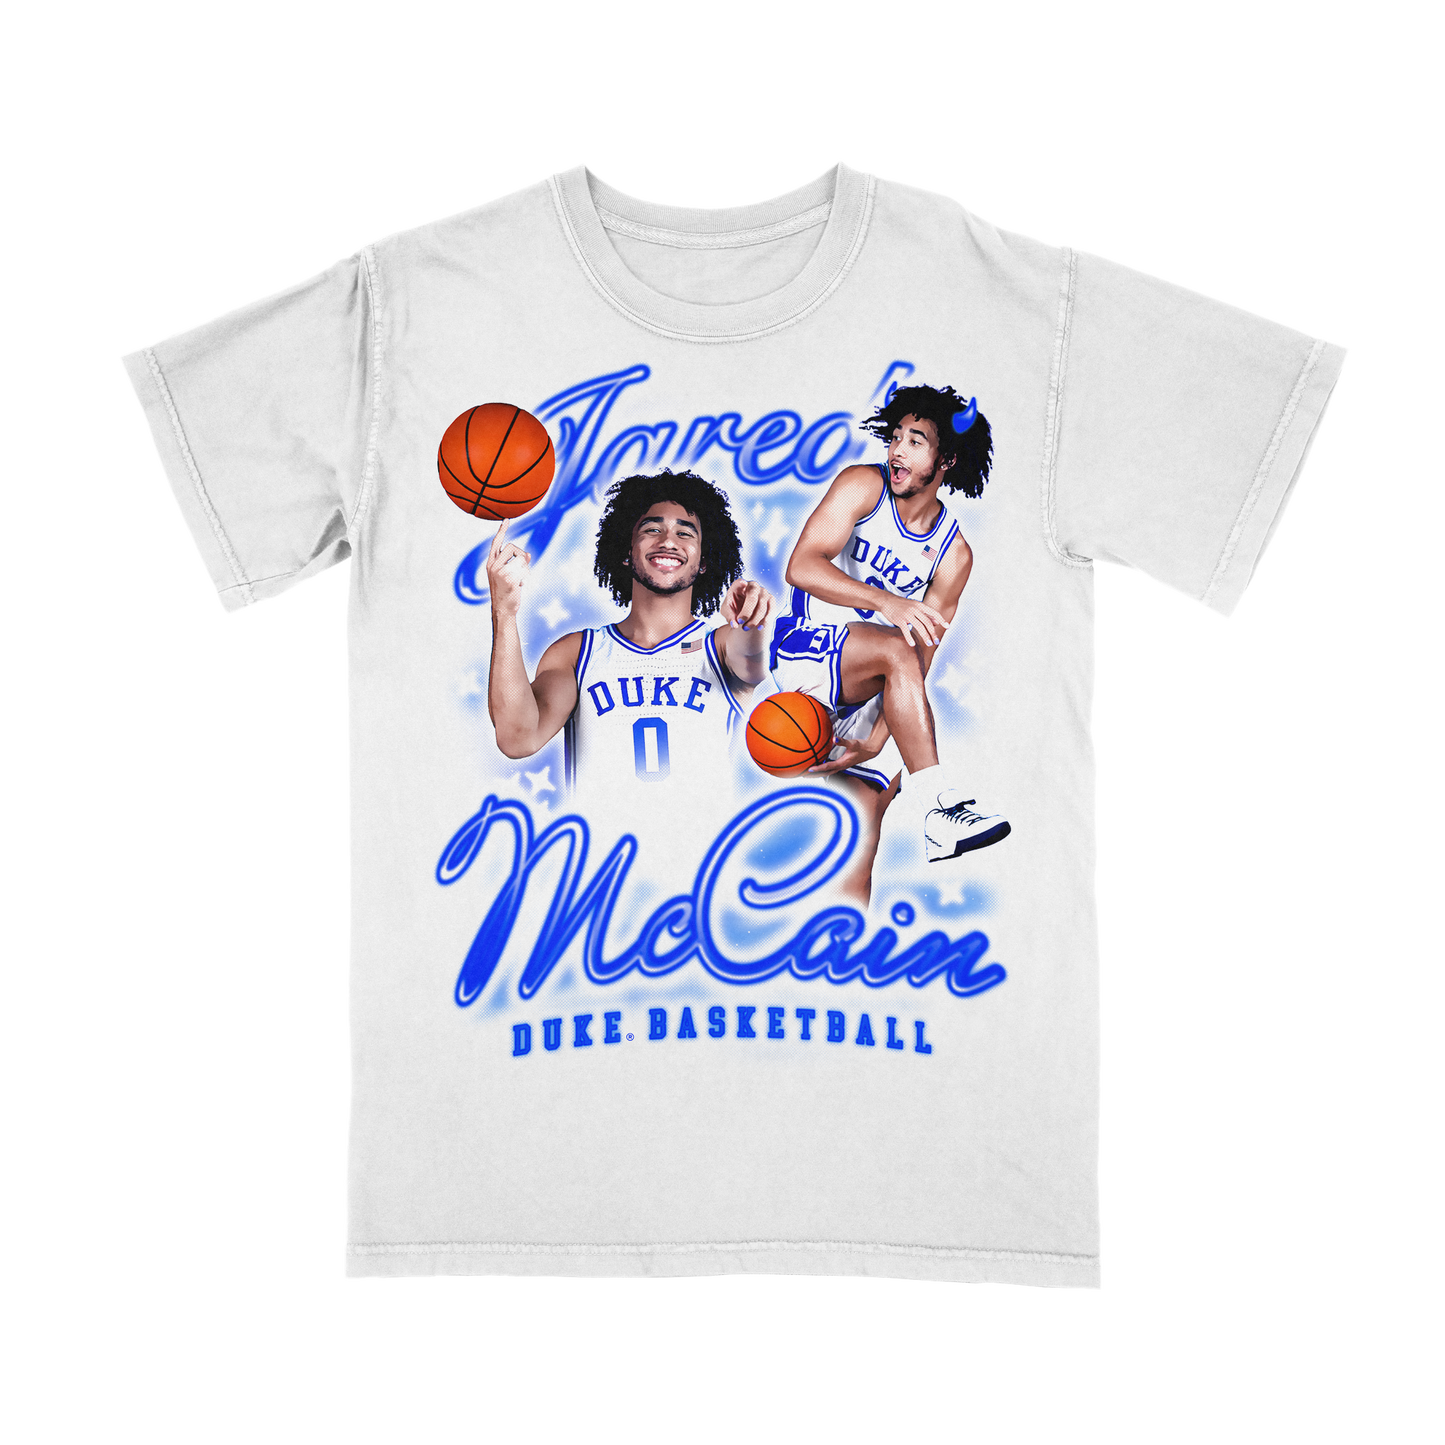 EXCLUSIVE DROP: Jared McCain - Comfort Colors Oversized Print Streetwear Tee in White (Youth)